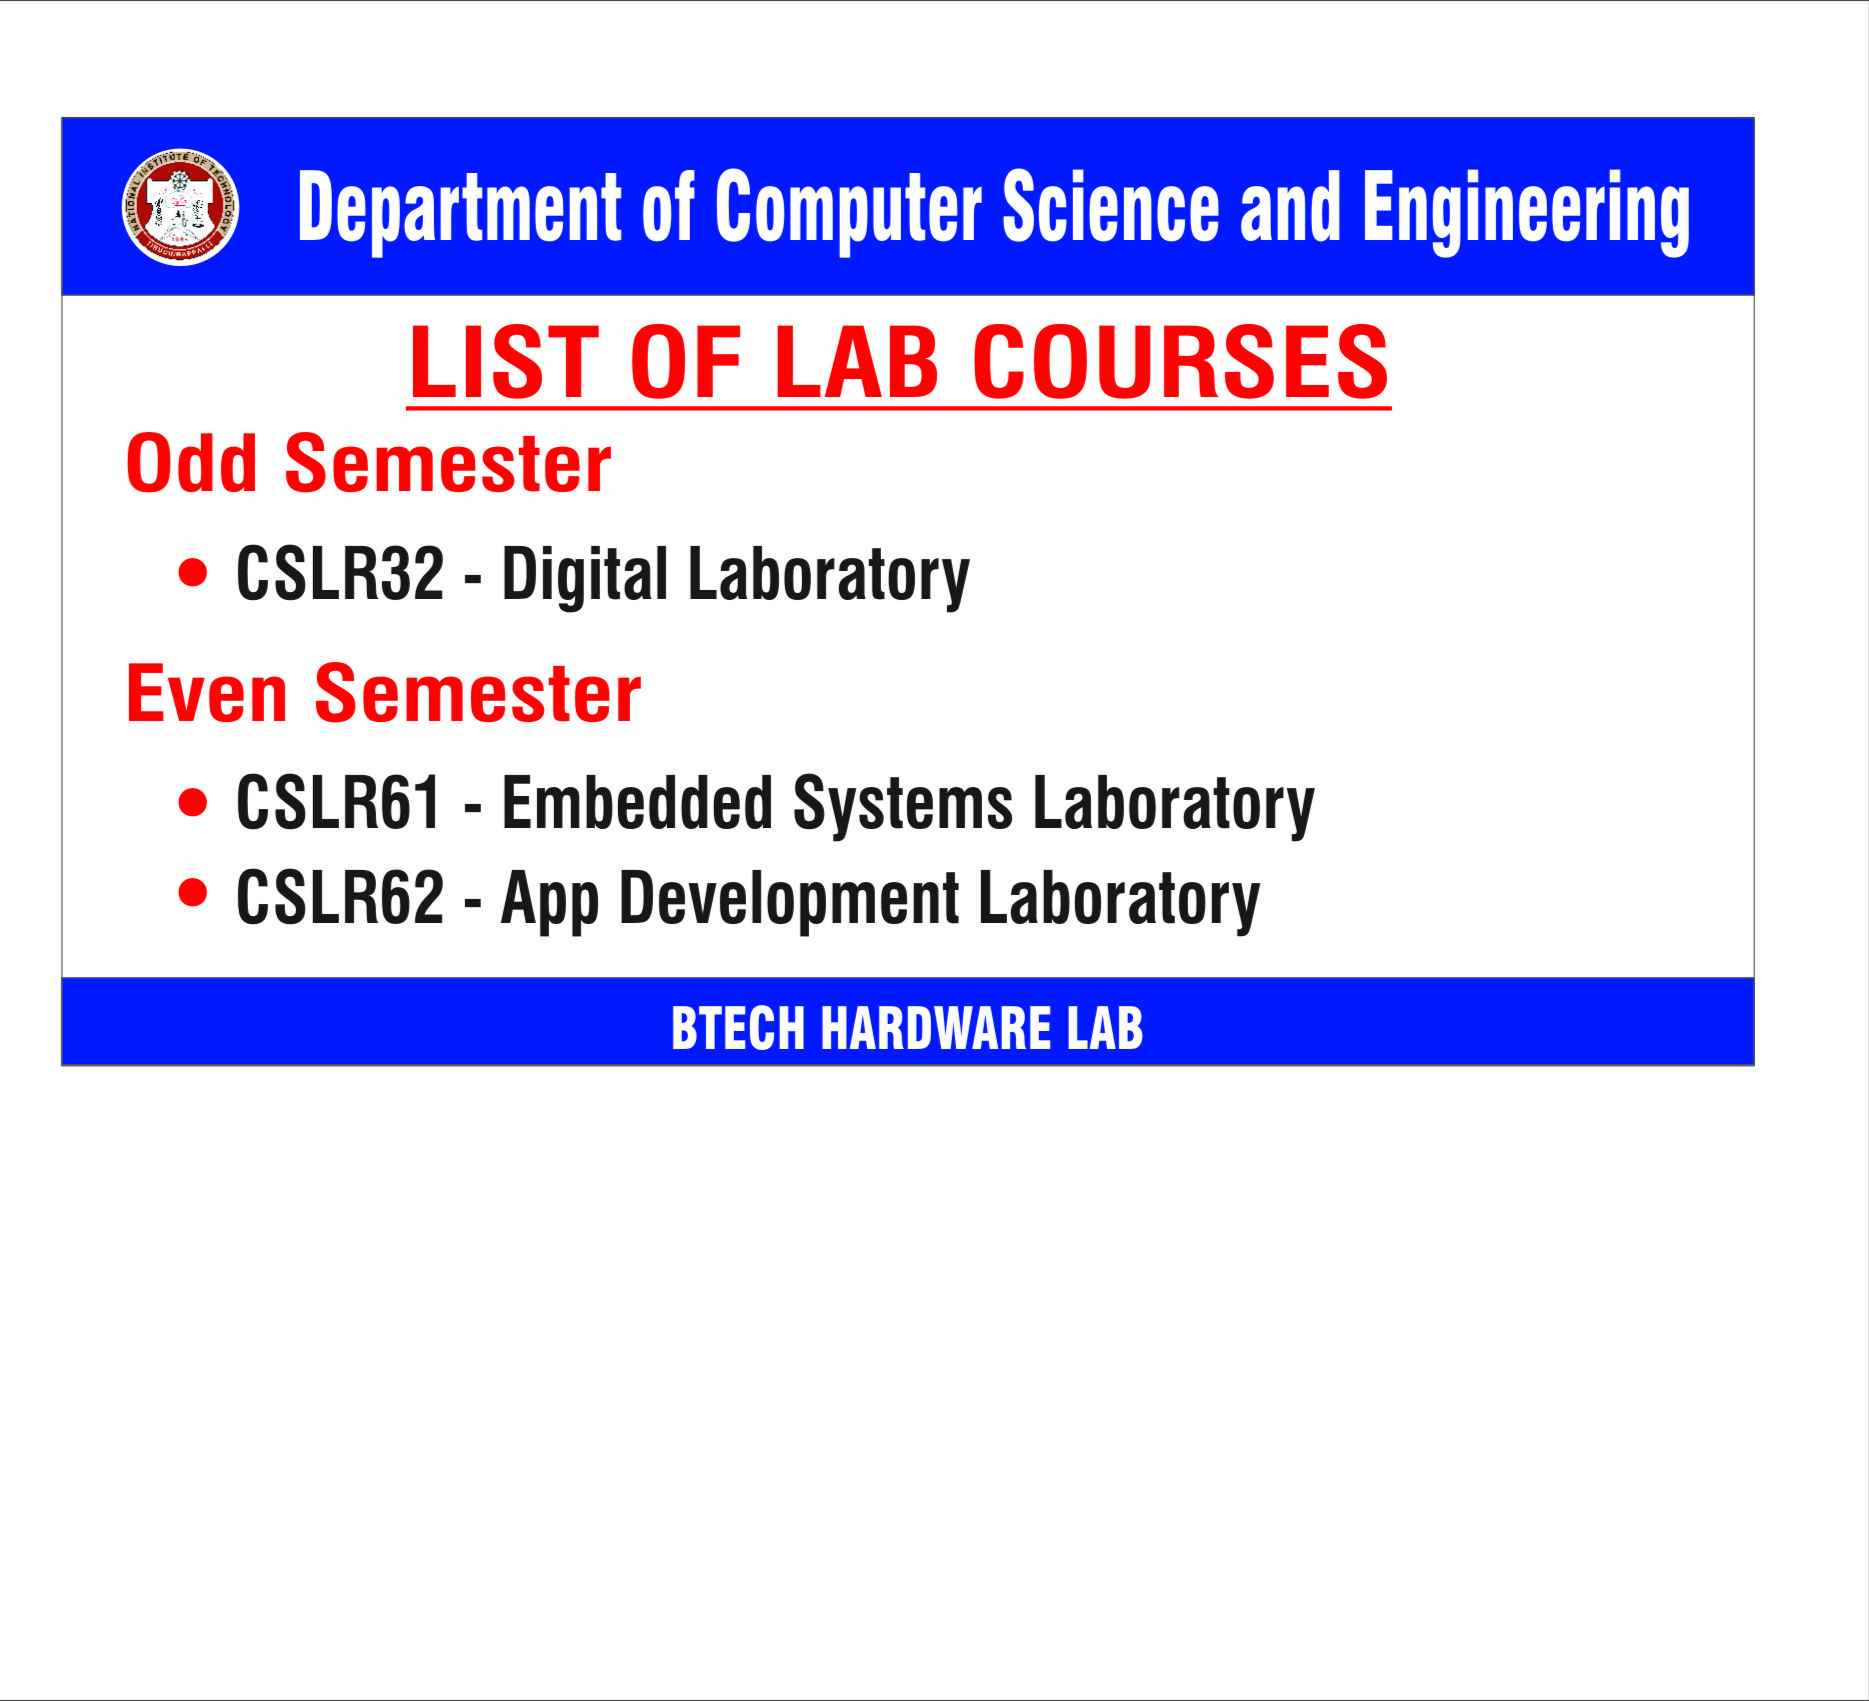 BTech Hardware Lab Courses